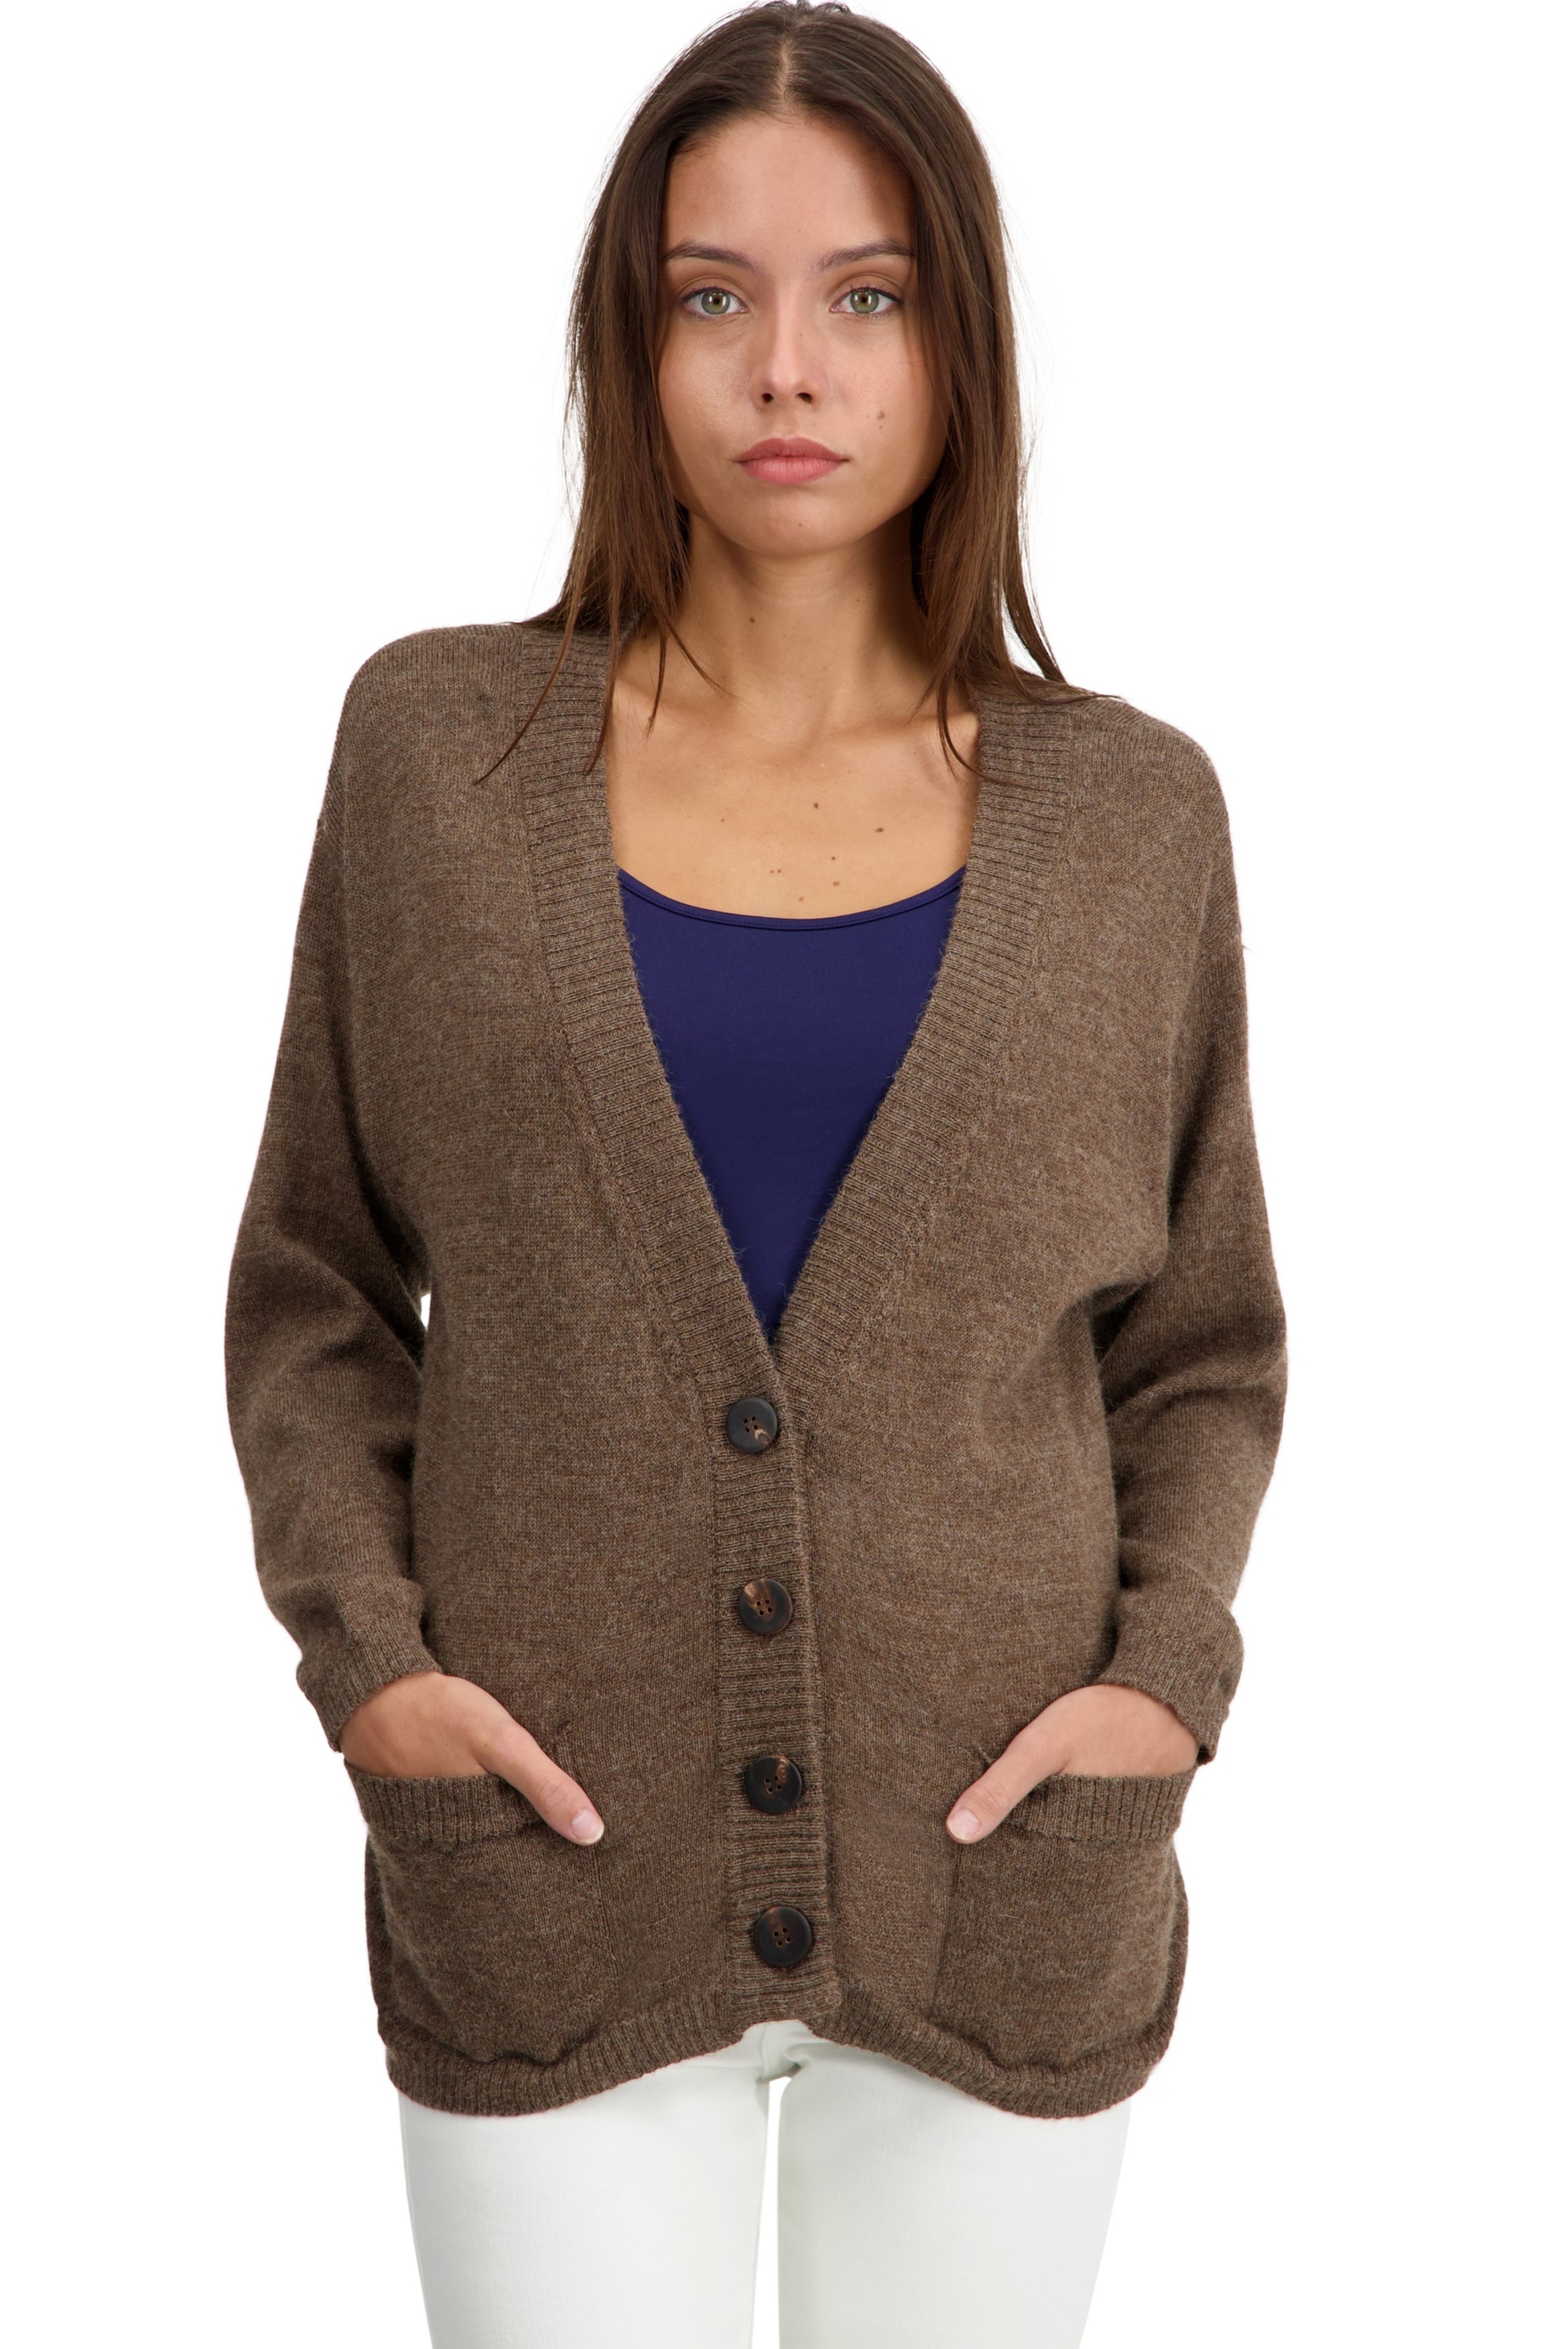 Baby Alpaca ladies cardigans toulouse natural 2xl